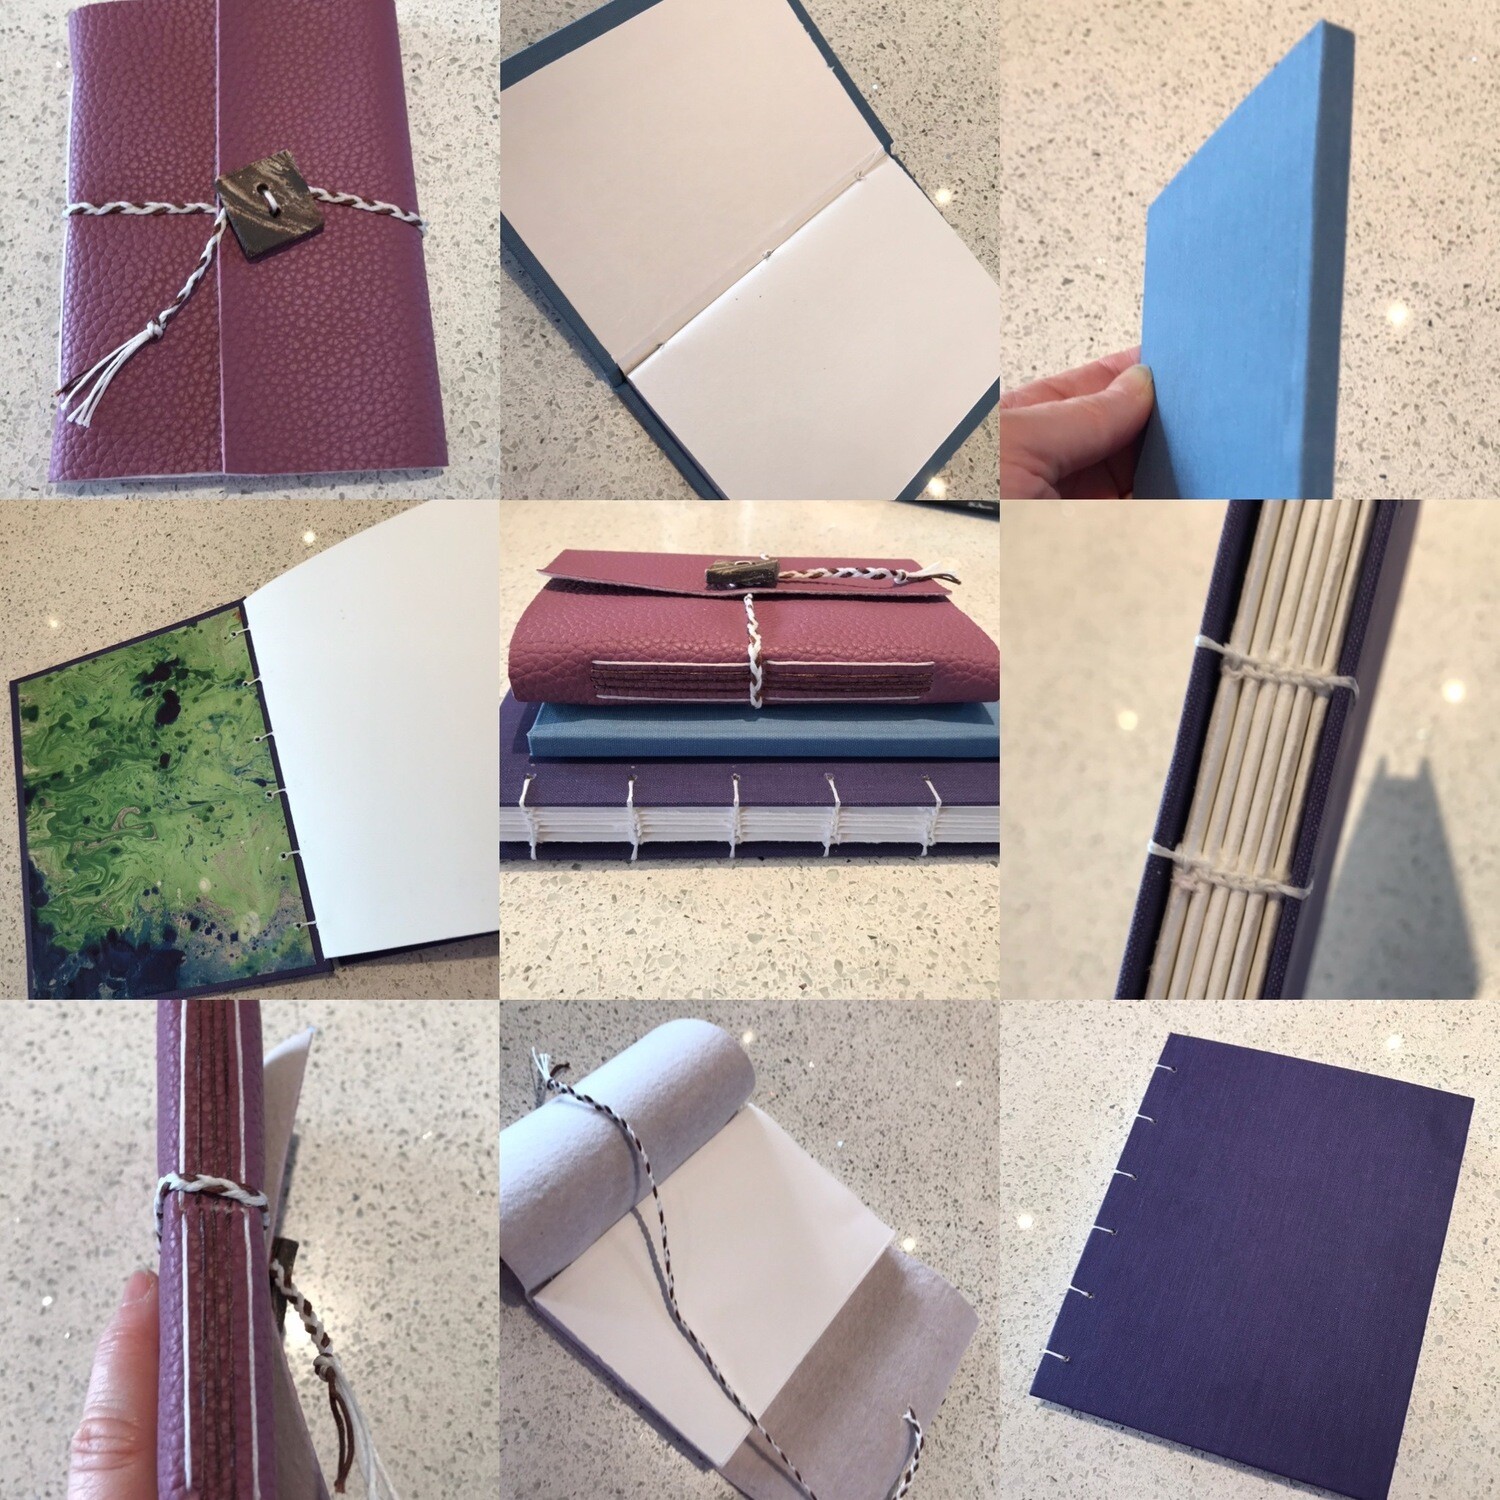 Bookbinding - Make your own Sketchbooks, Journals, Books - 1 Day